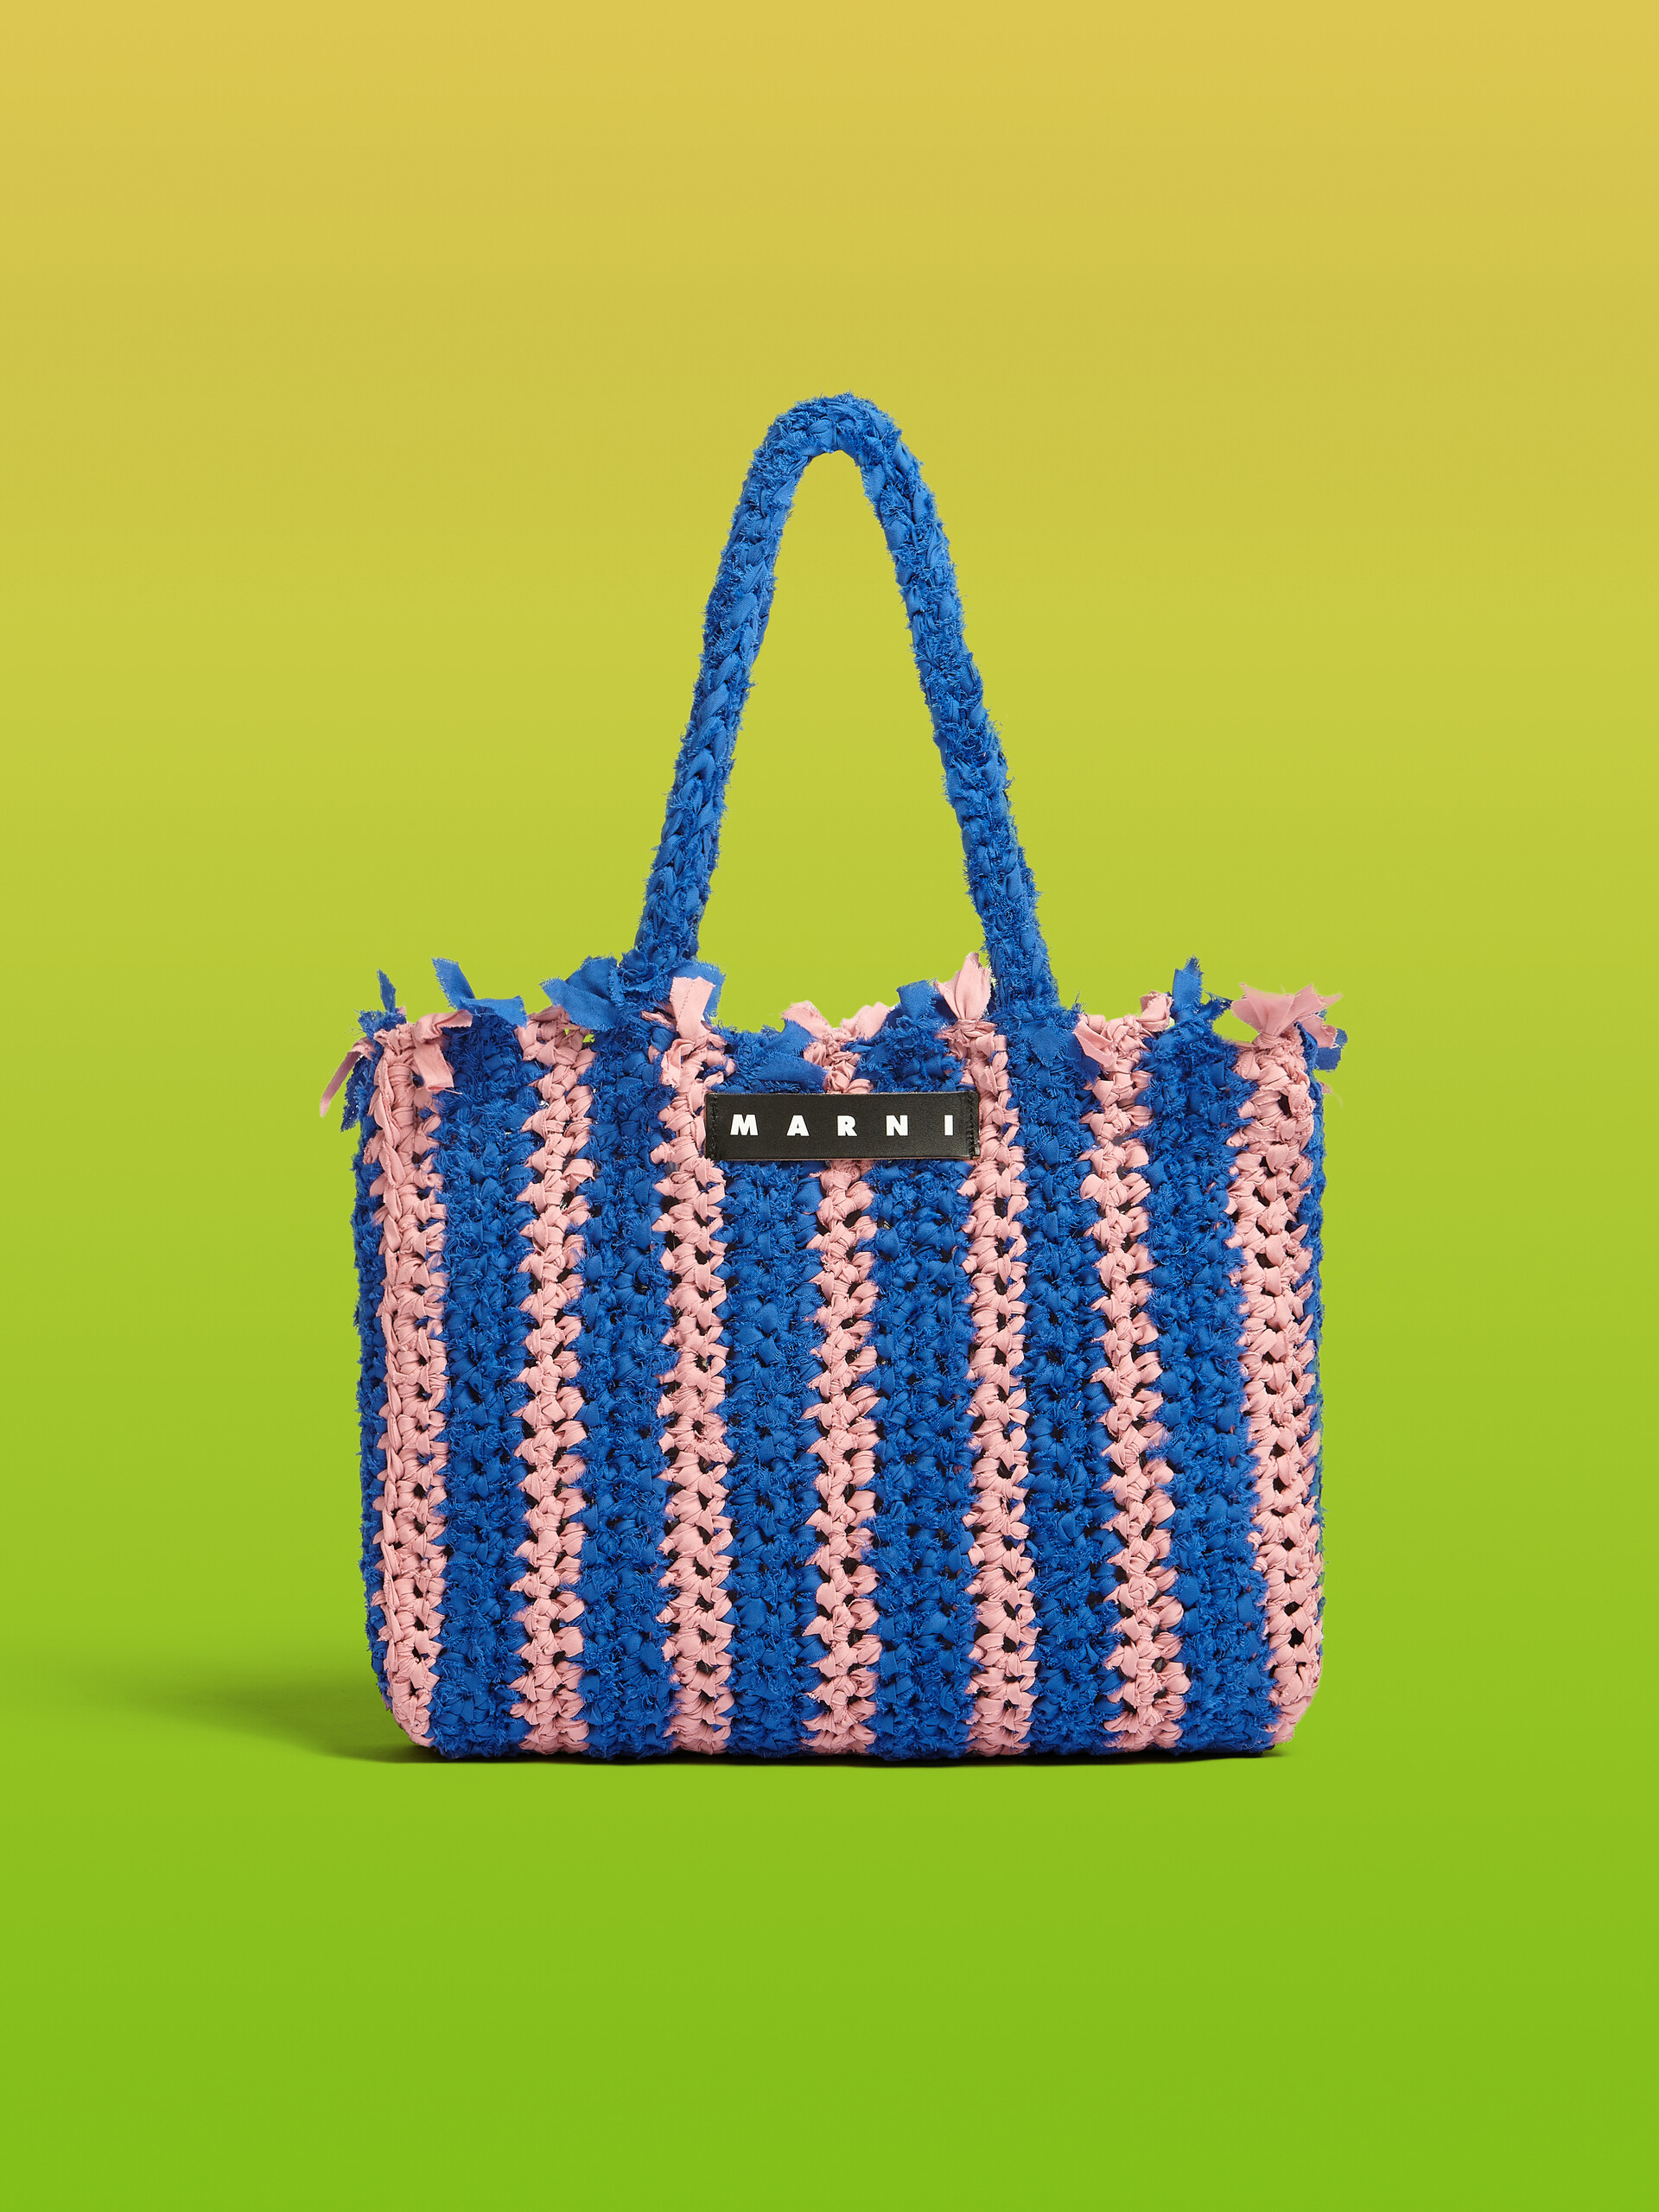 Pink and blue cotton MARNI MARKET bag - Bags - Image 1